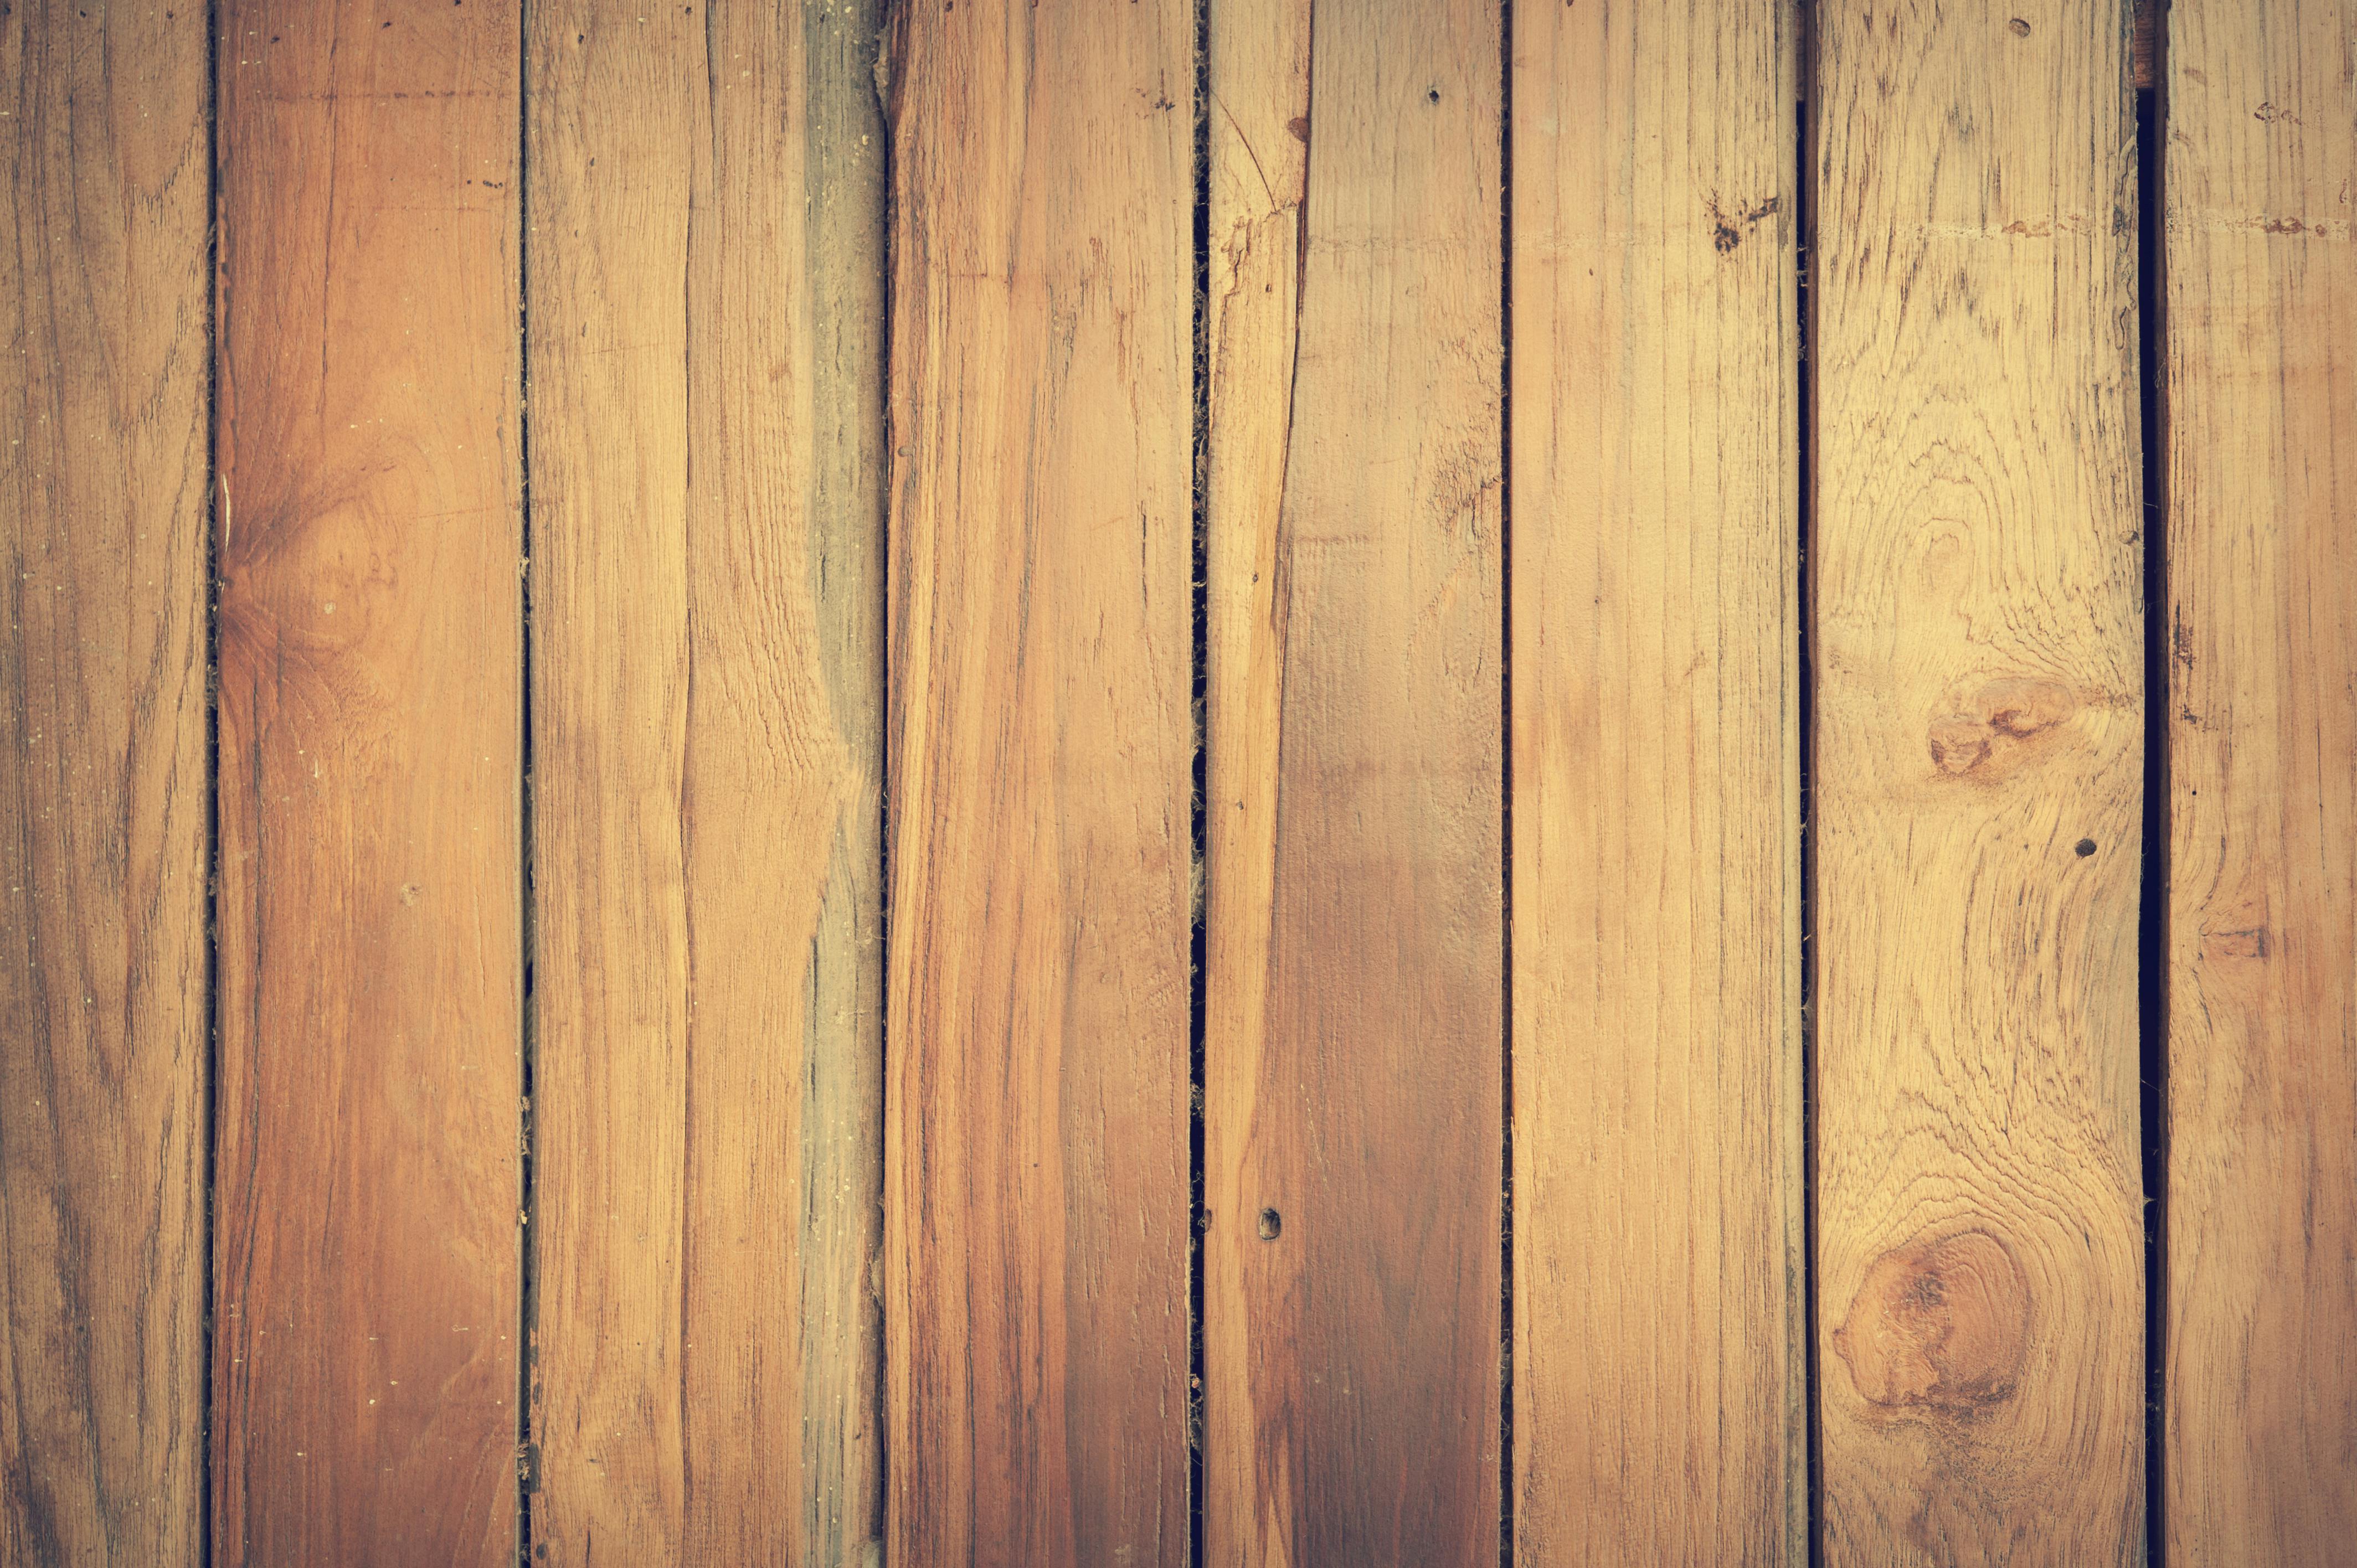 Close-up of Leaf on Wooden Plank · Free Stock Photo